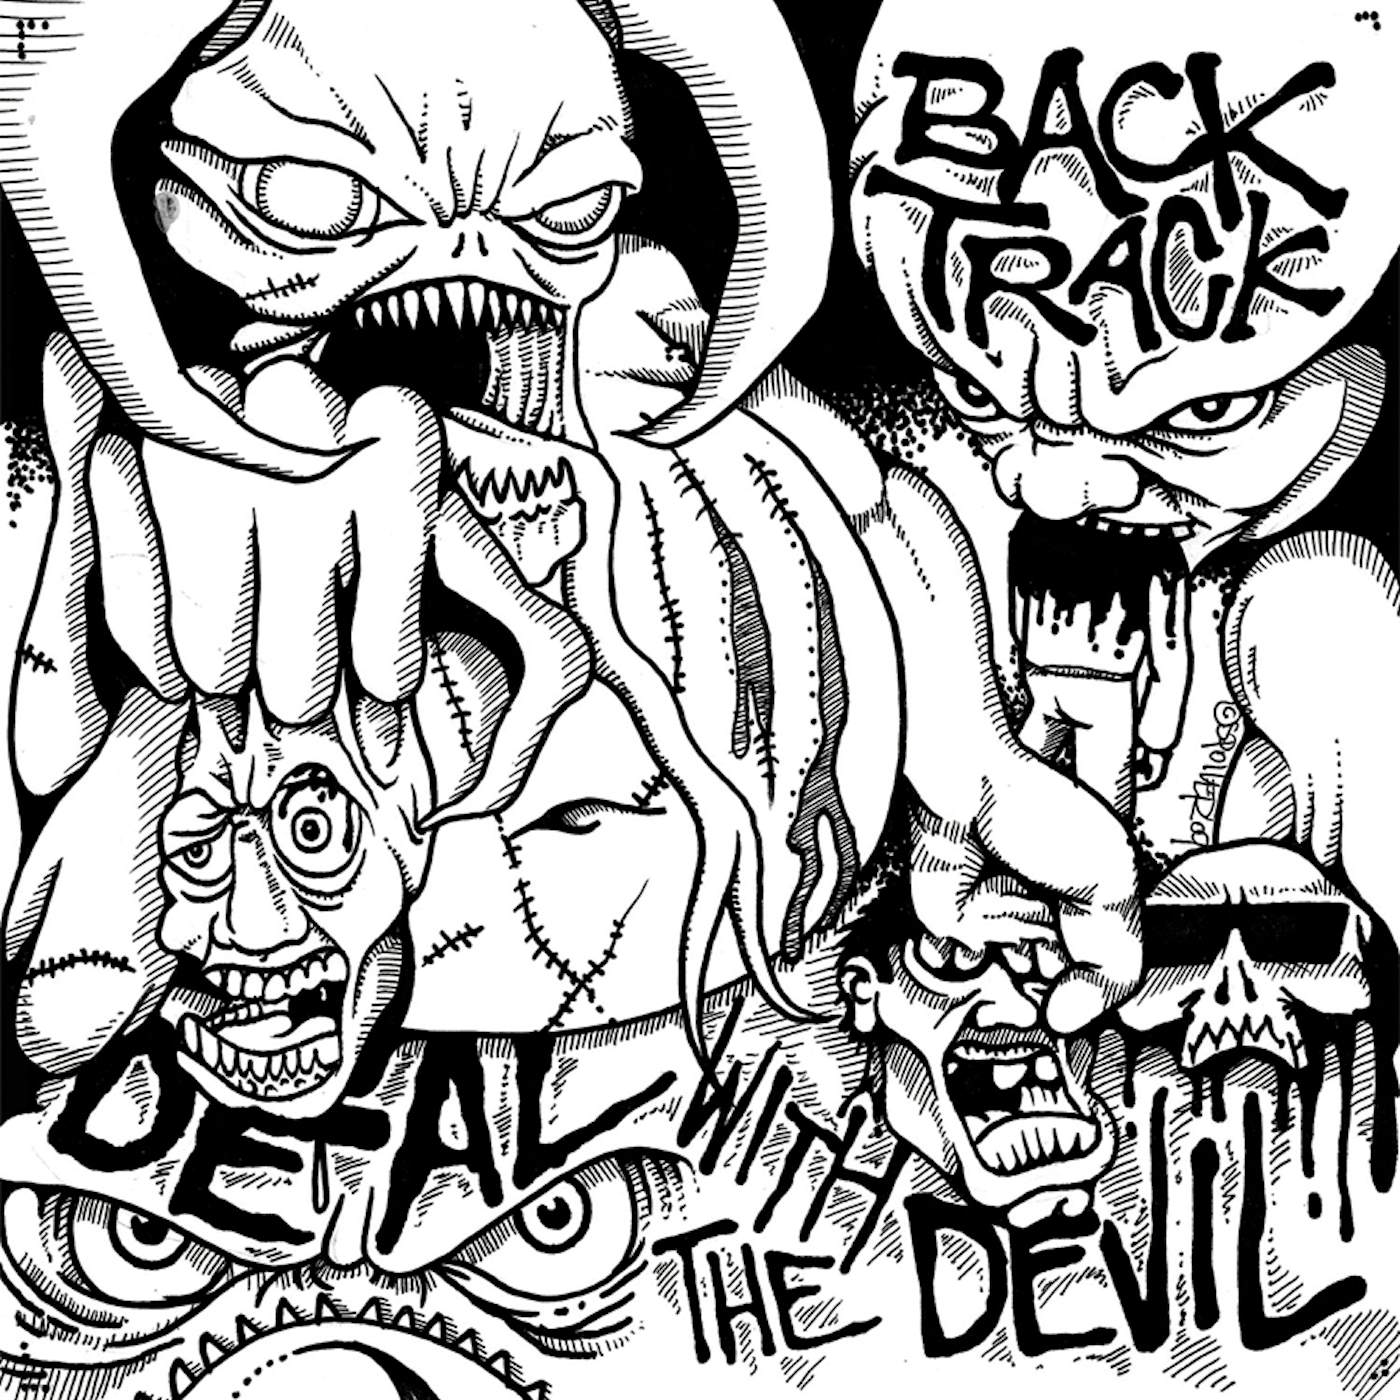 Backtrack Deal With The Devil Vinyl Record